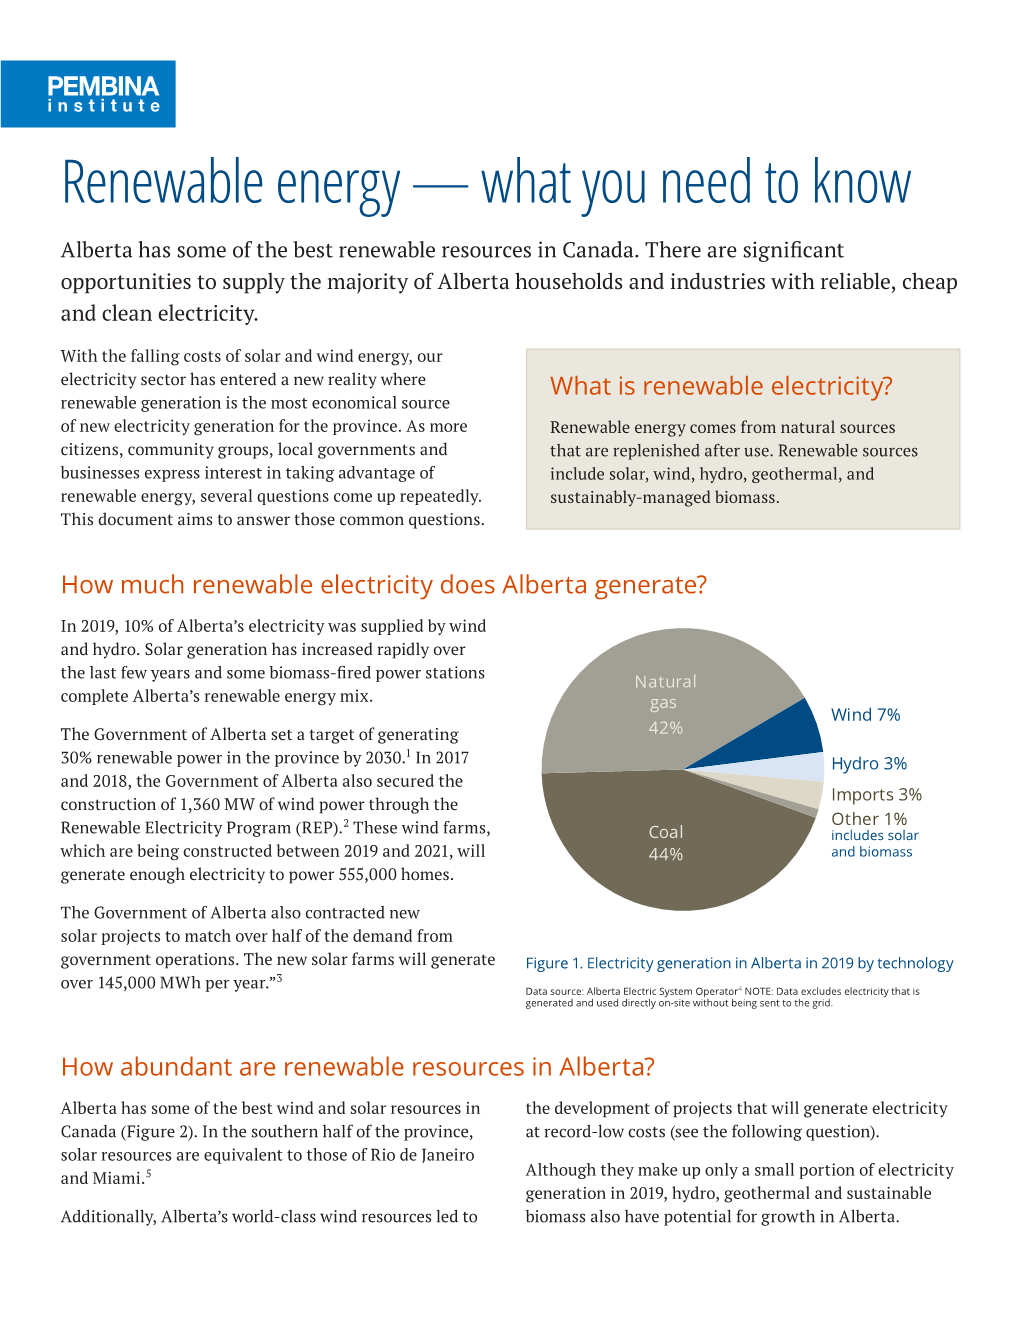 Renewable Energy — What You Need to Know